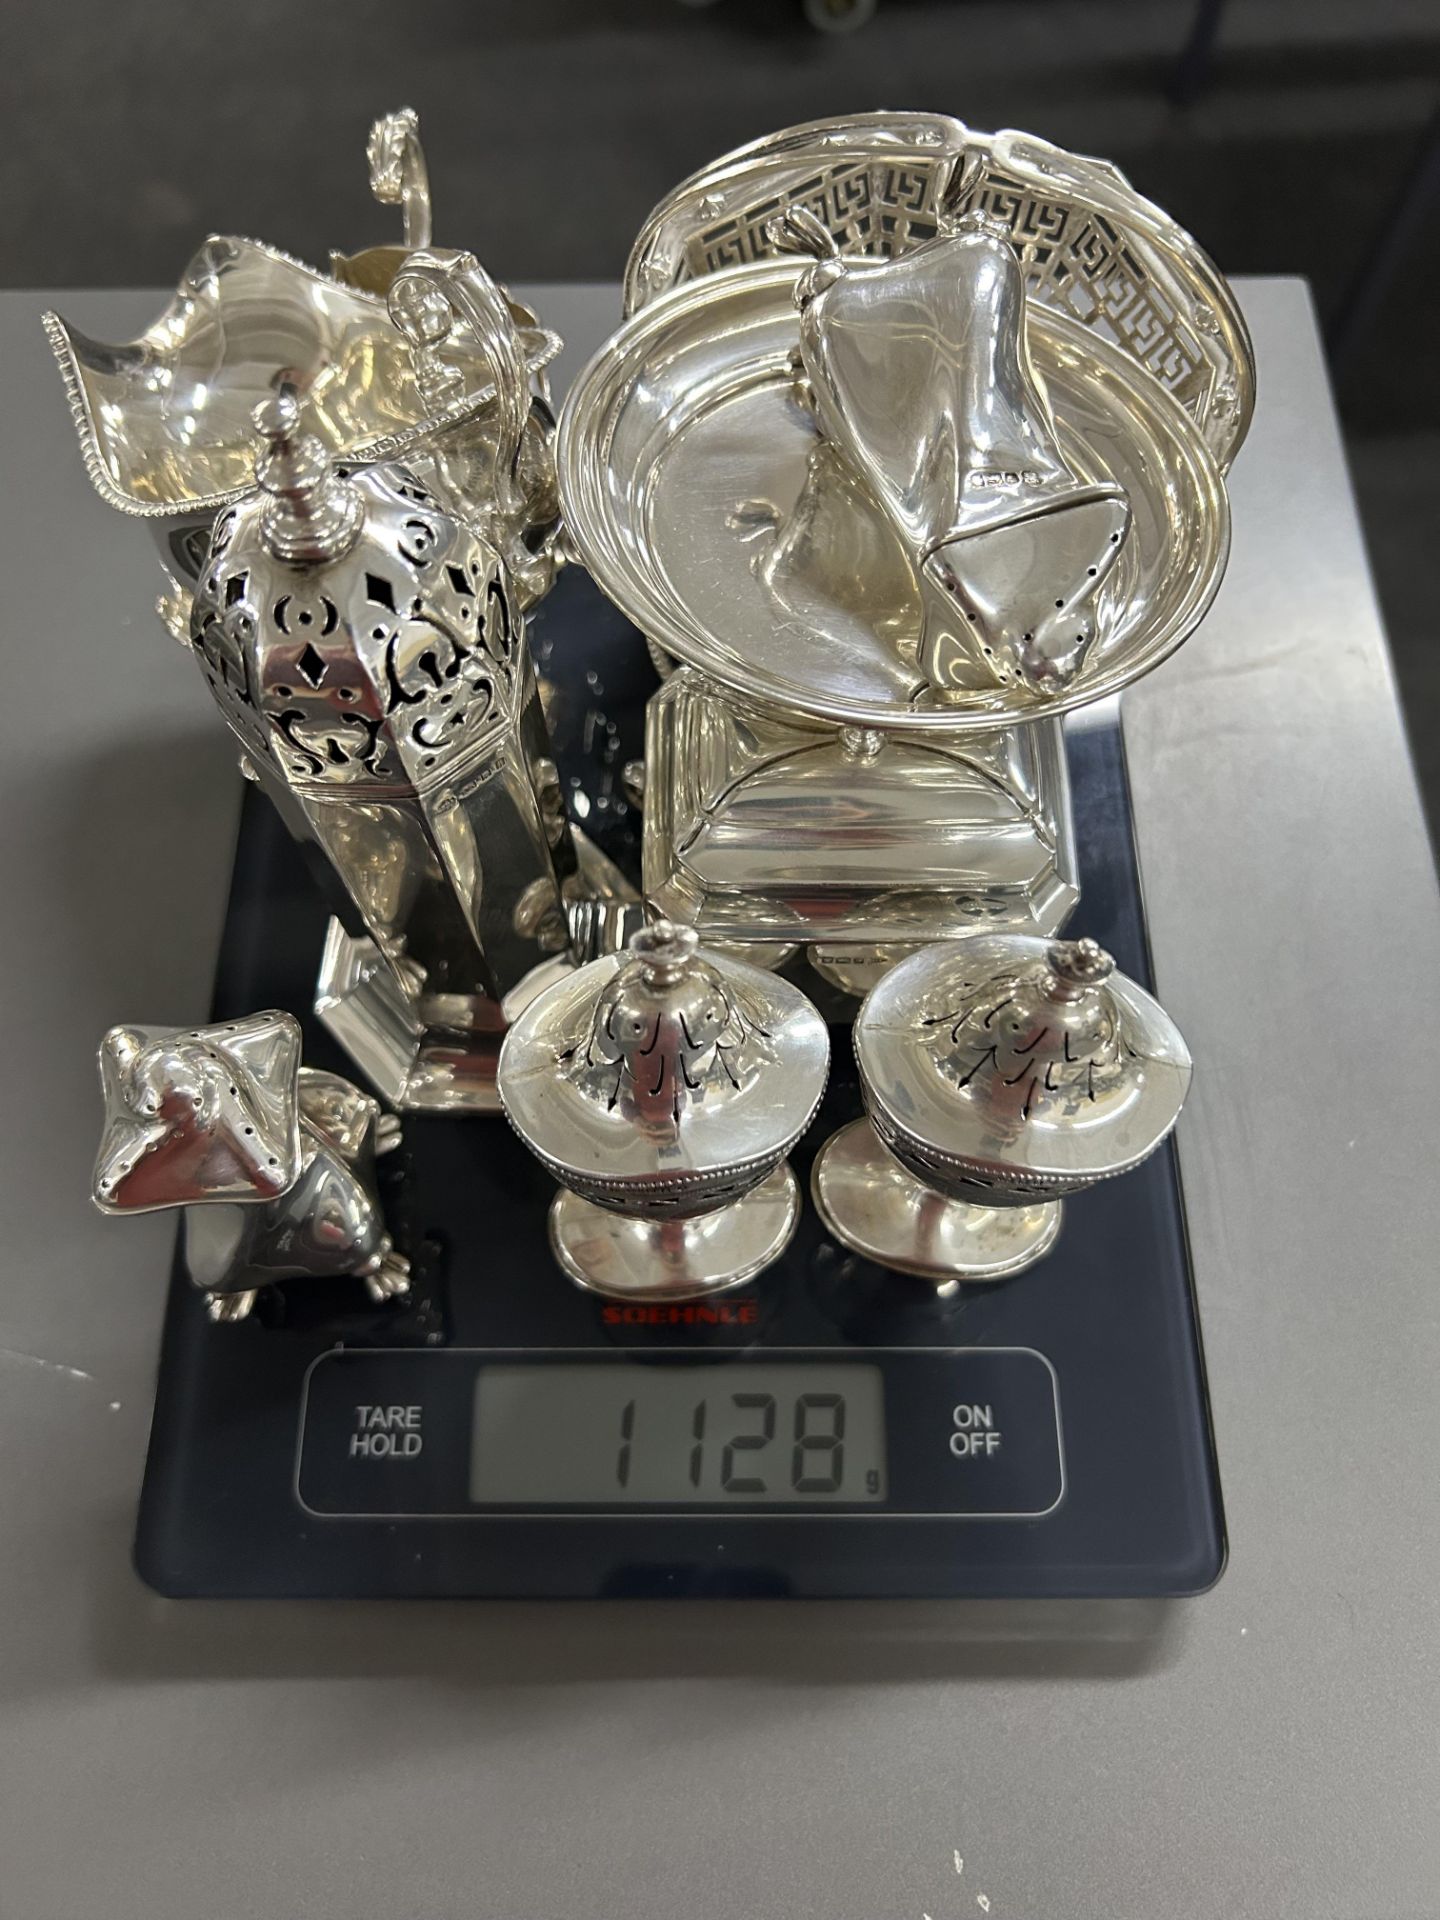 Large collection of silver items, Mostly England. 19th C. Total gross weight: 2915g. (W:22 x H:14 cm - Image 28 of 30